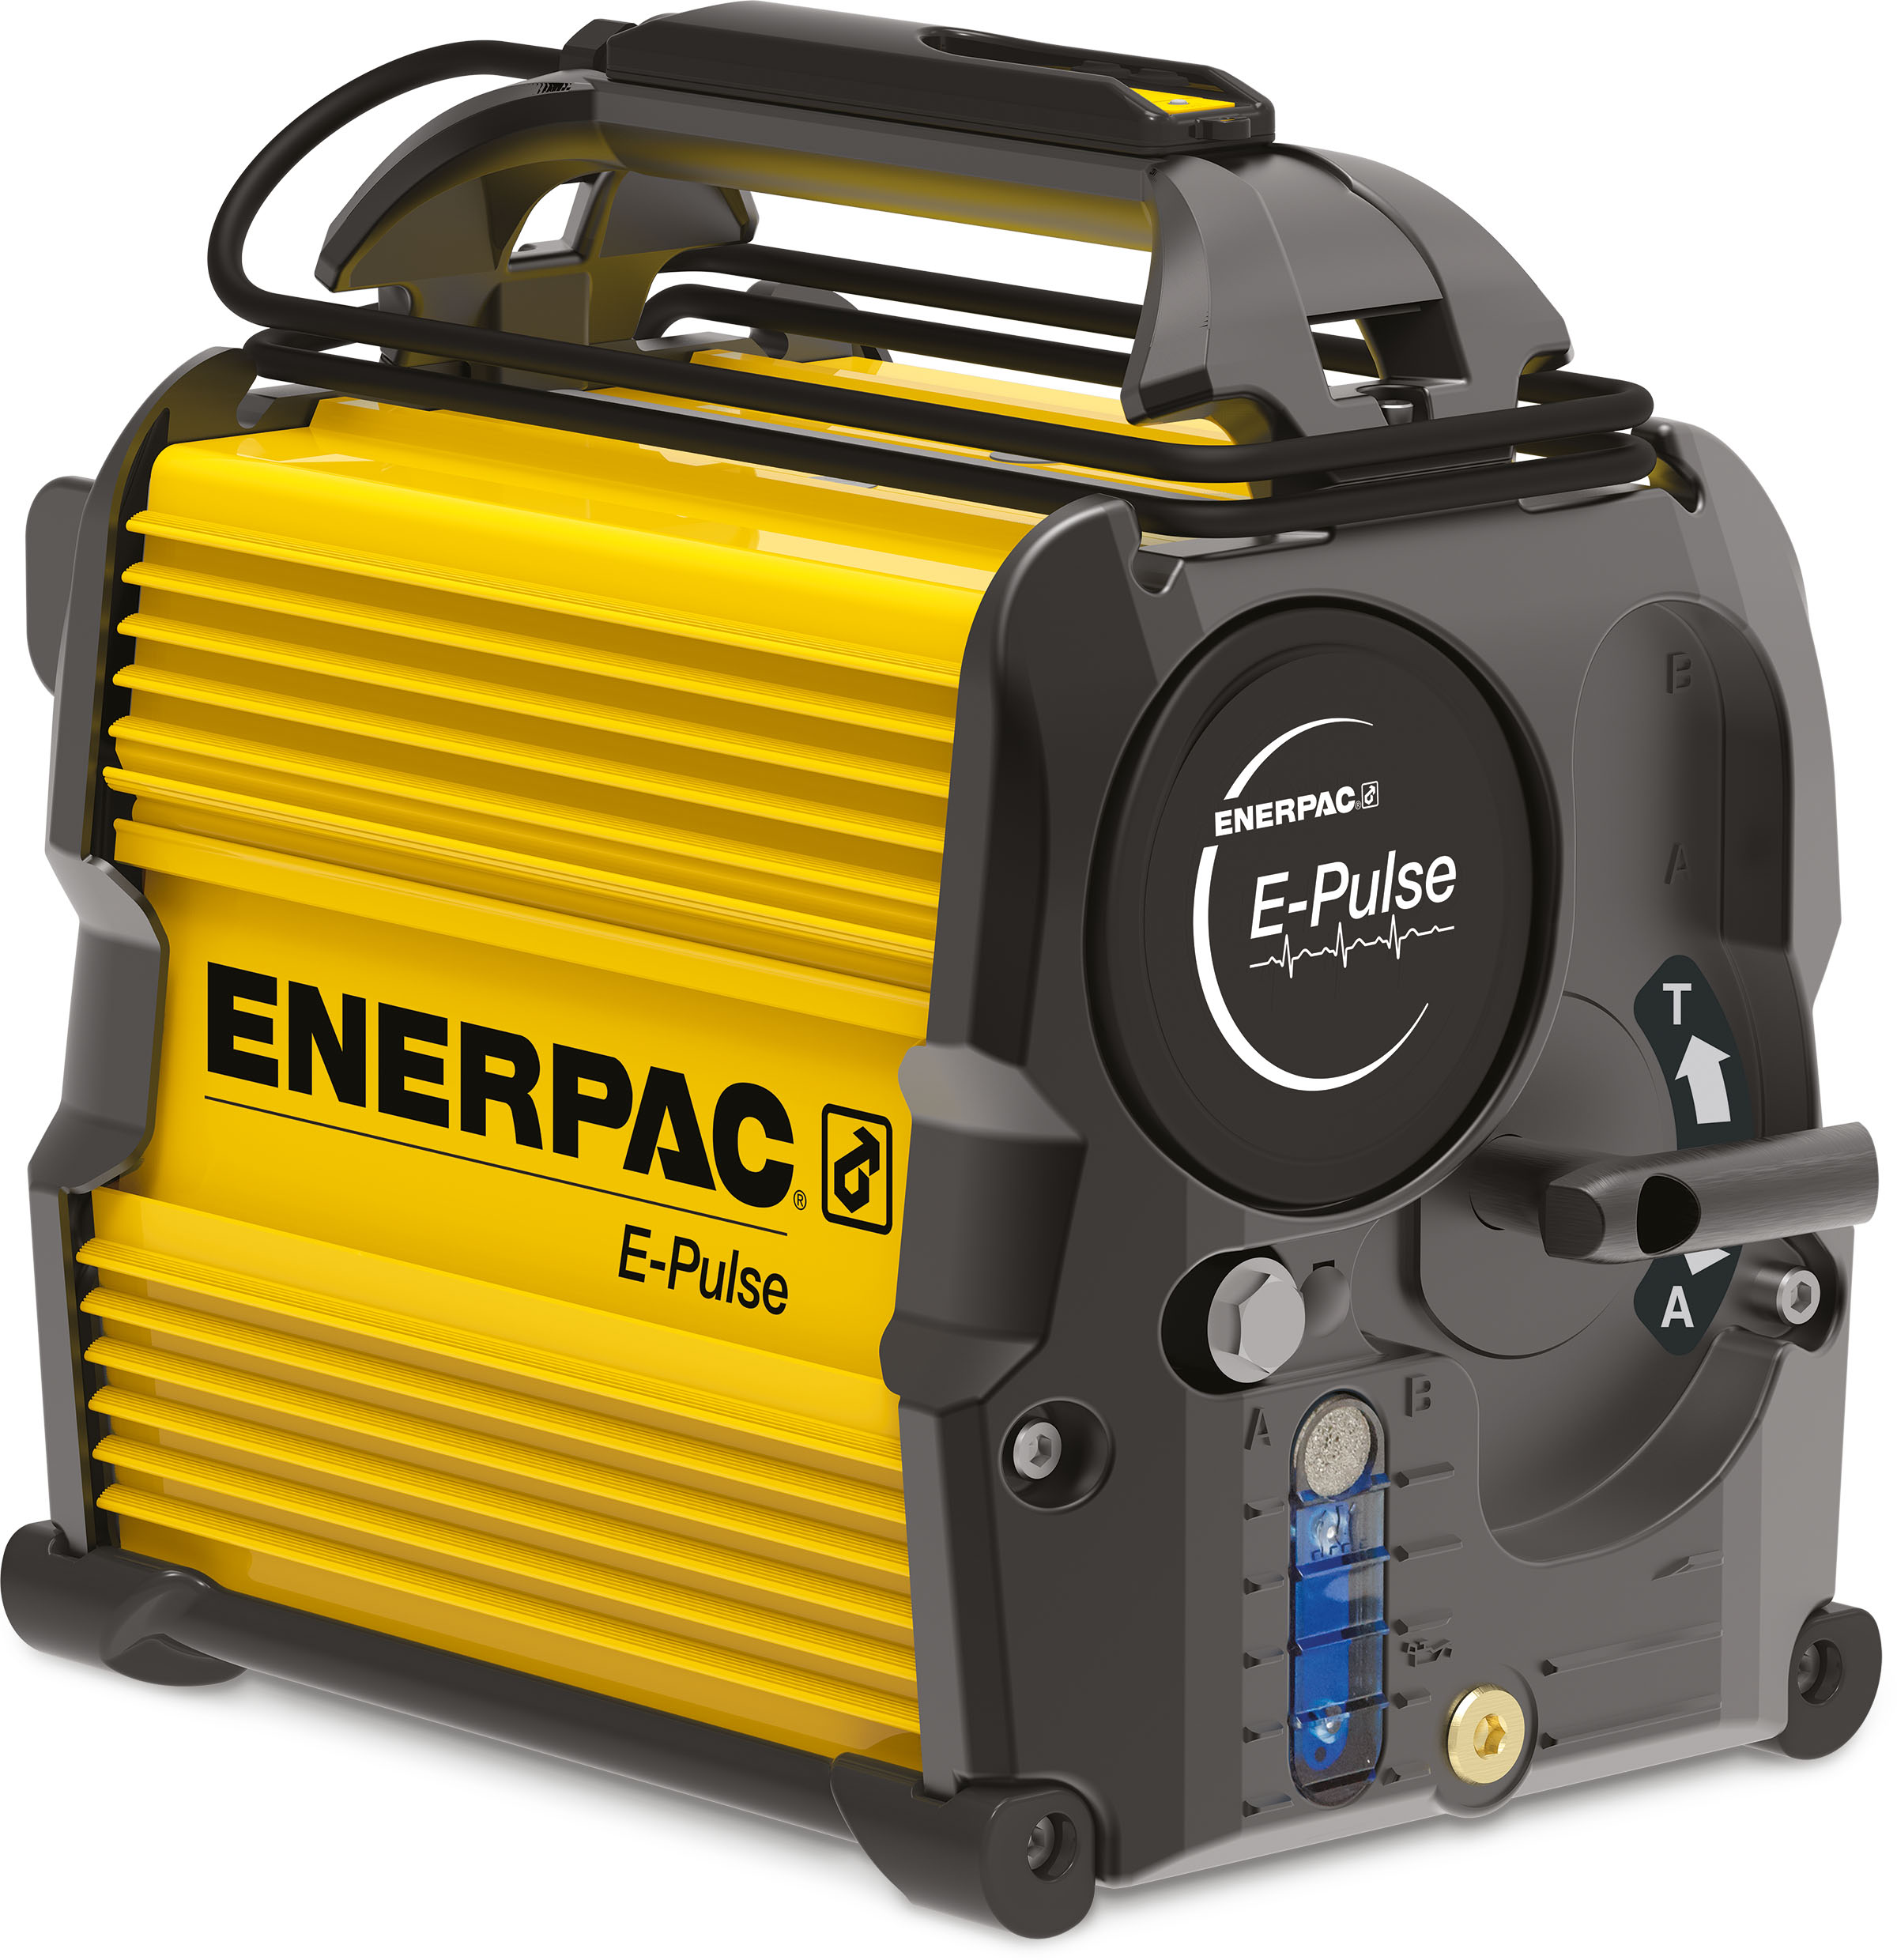 Enerpac’s new E-Pulse electric hydraulic pump has smart controls and maintains constant motor power across the pressure range.